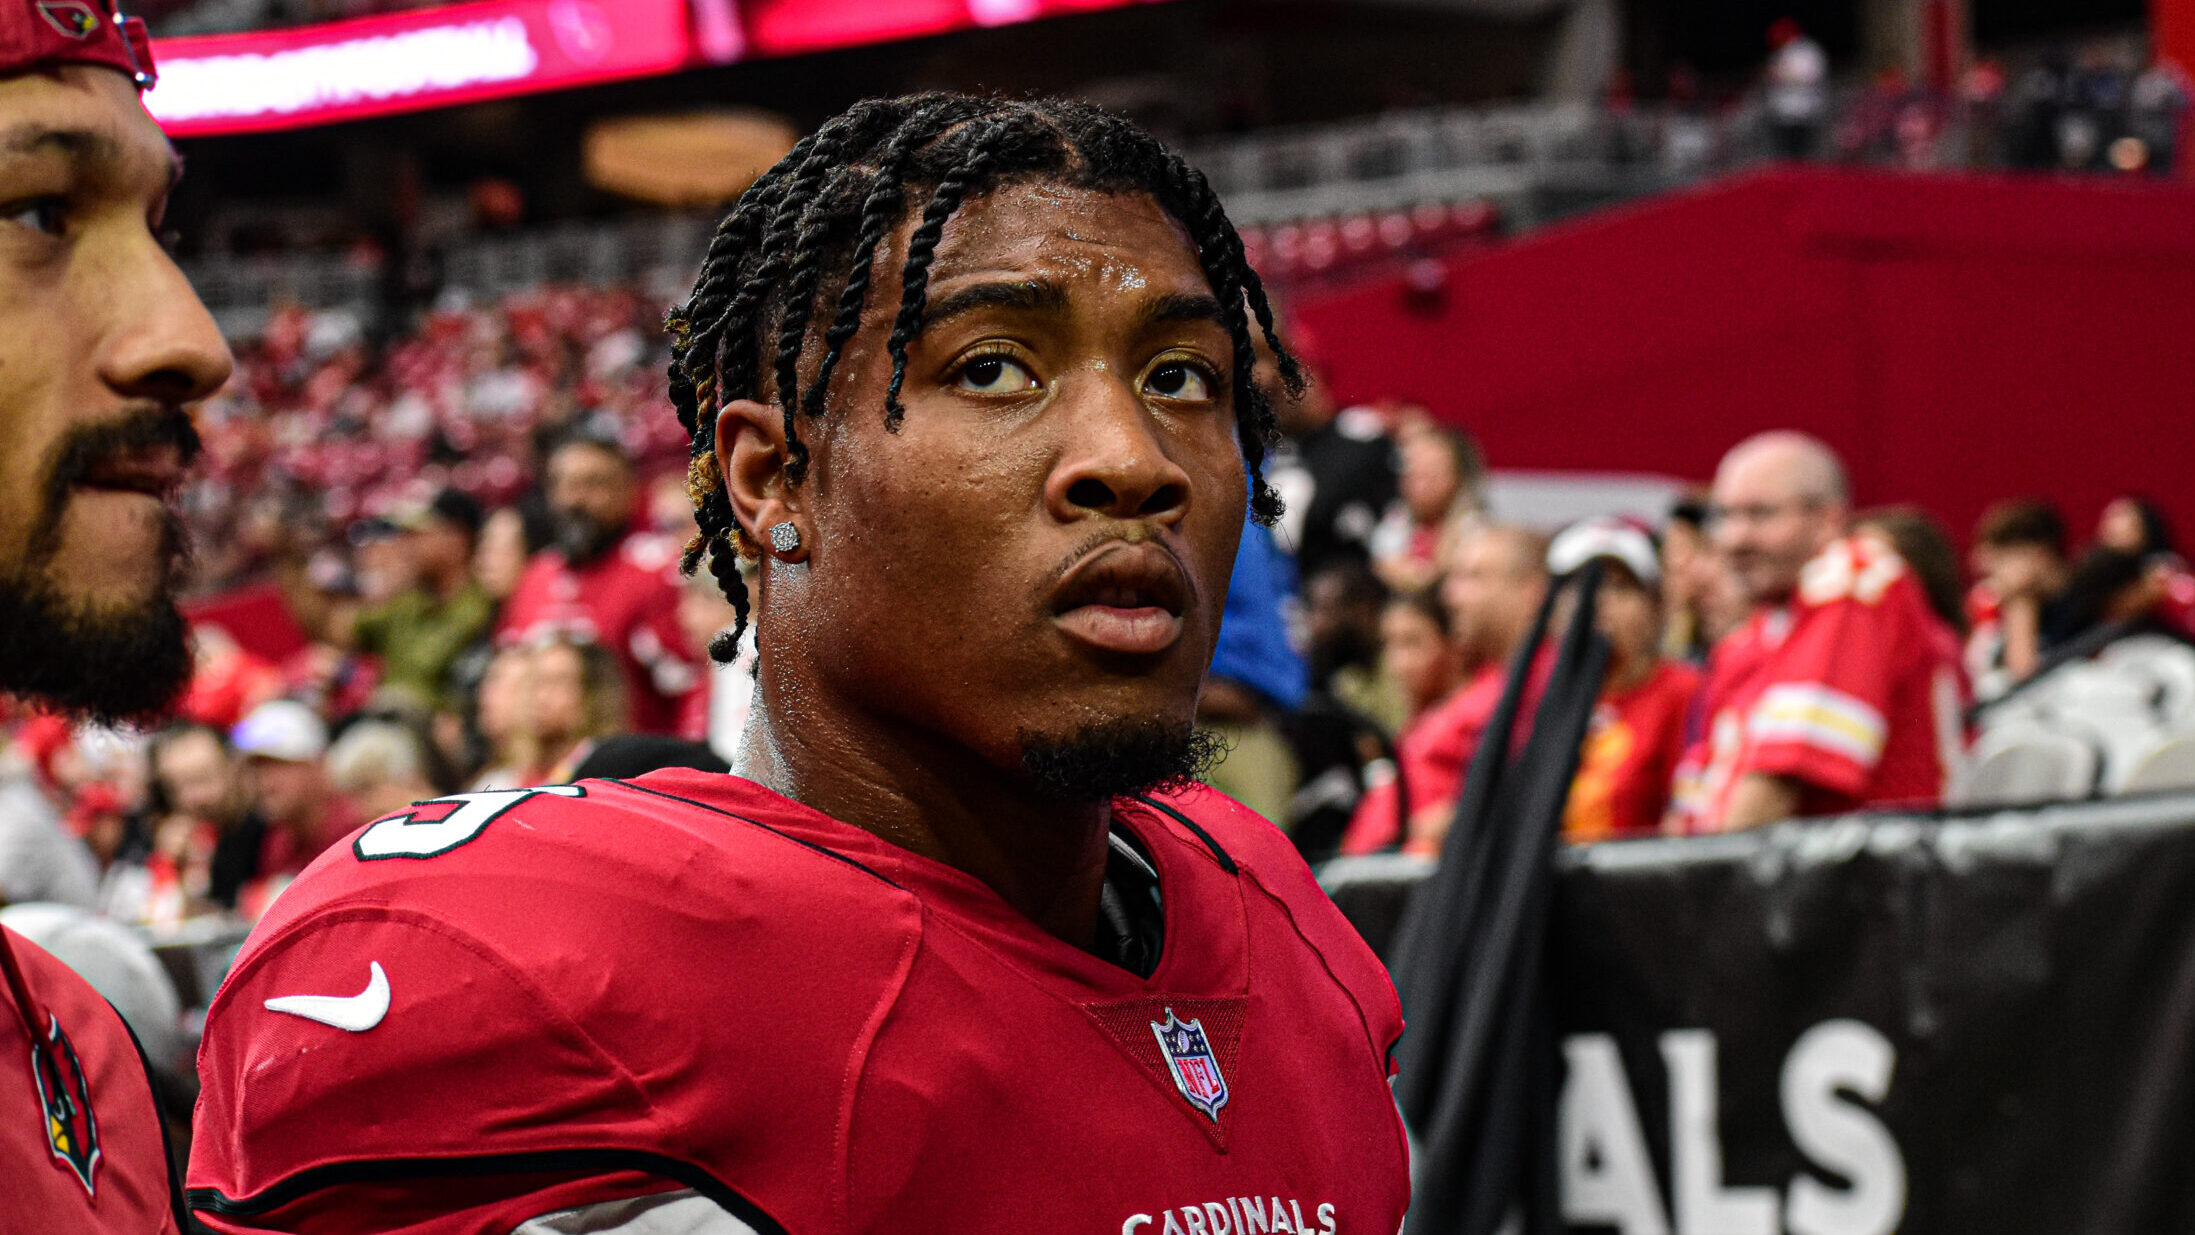 Tennessee Titans walloped by Arizona Cardinals in 2021 season opener